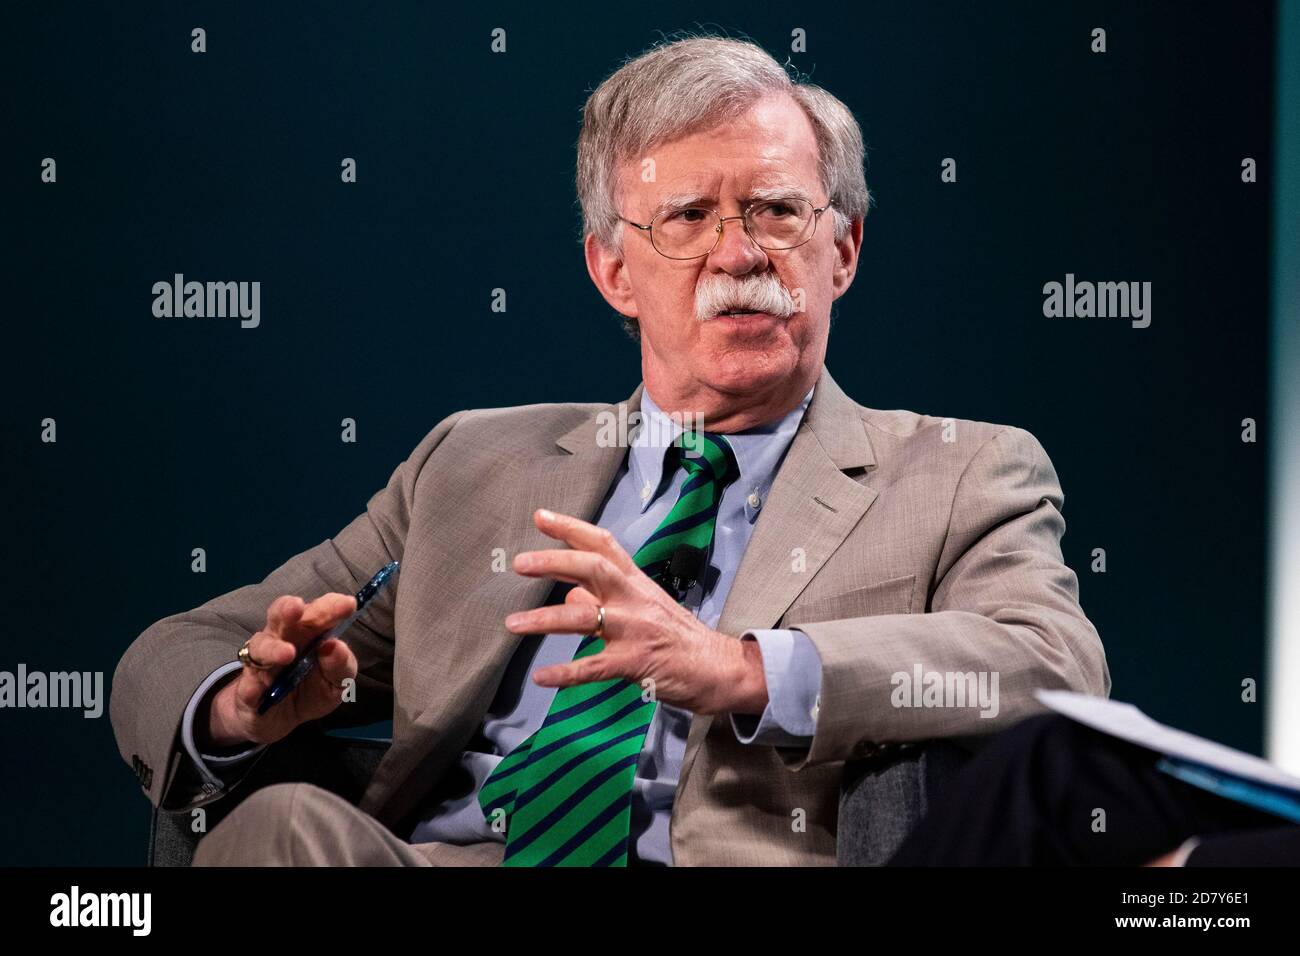 John Bolton, national security advisor, speaks during the Wall Street Journal CFO Network conference in Washington, D.C., U.S., on Tuesday, June 11, 2019. Panelists will discuss how rules governing financial reporting and corporate behavior will change and explore the mergers and acquisition landscape and corporate activism. Credit: Alex Edelman/The Photo Access Stock Photo